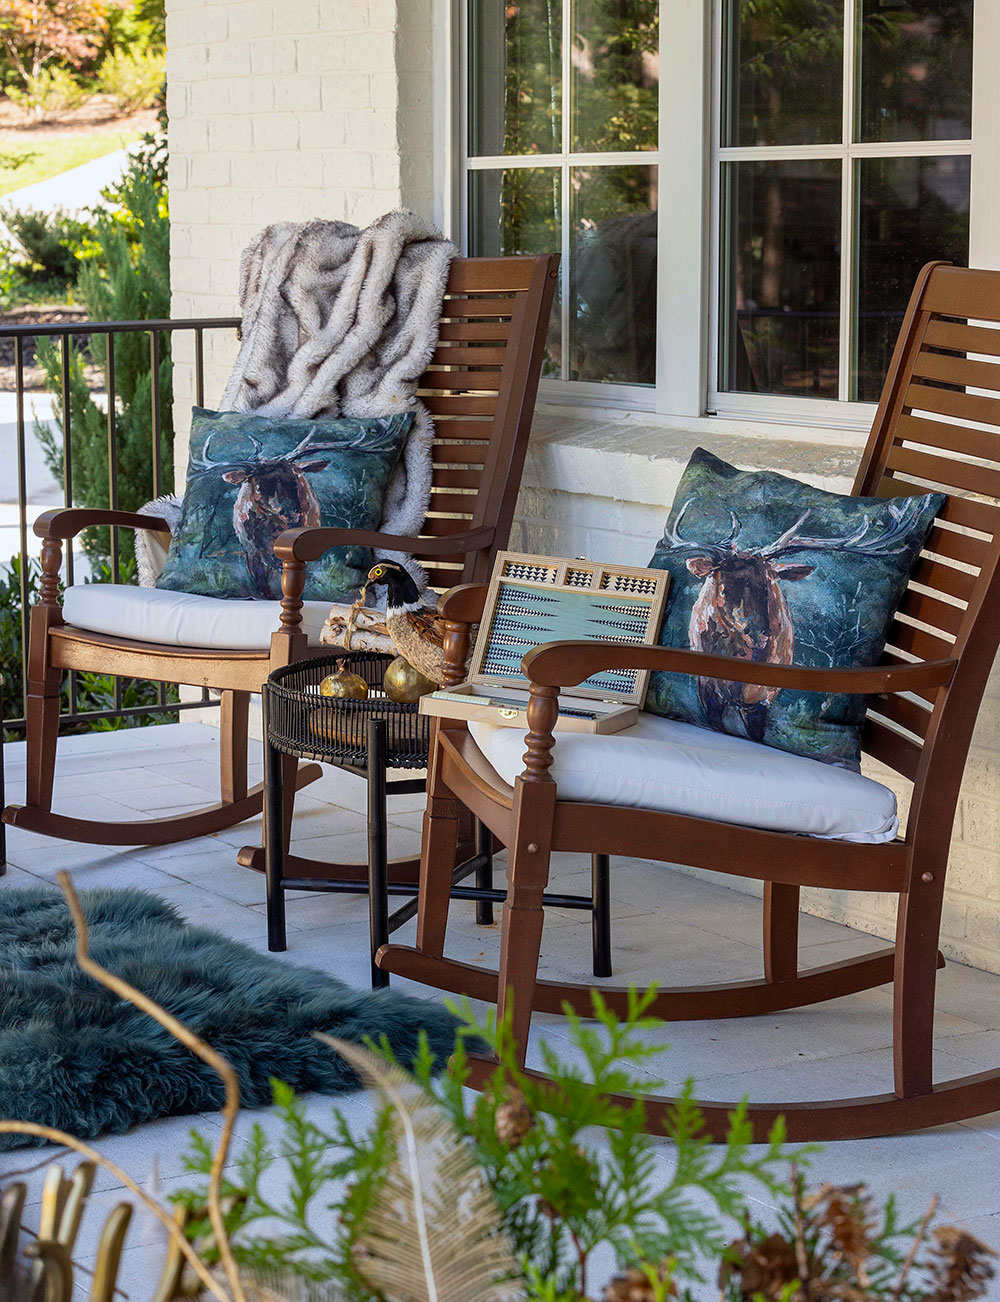 ROCK THE HOLIDAYS: If you appreciate timeless elegance, a Southern-style rocking chair is the perfect evergreen choice for added comfort and style. Adorn them with a snug faux fur throw for a touch of luxury.